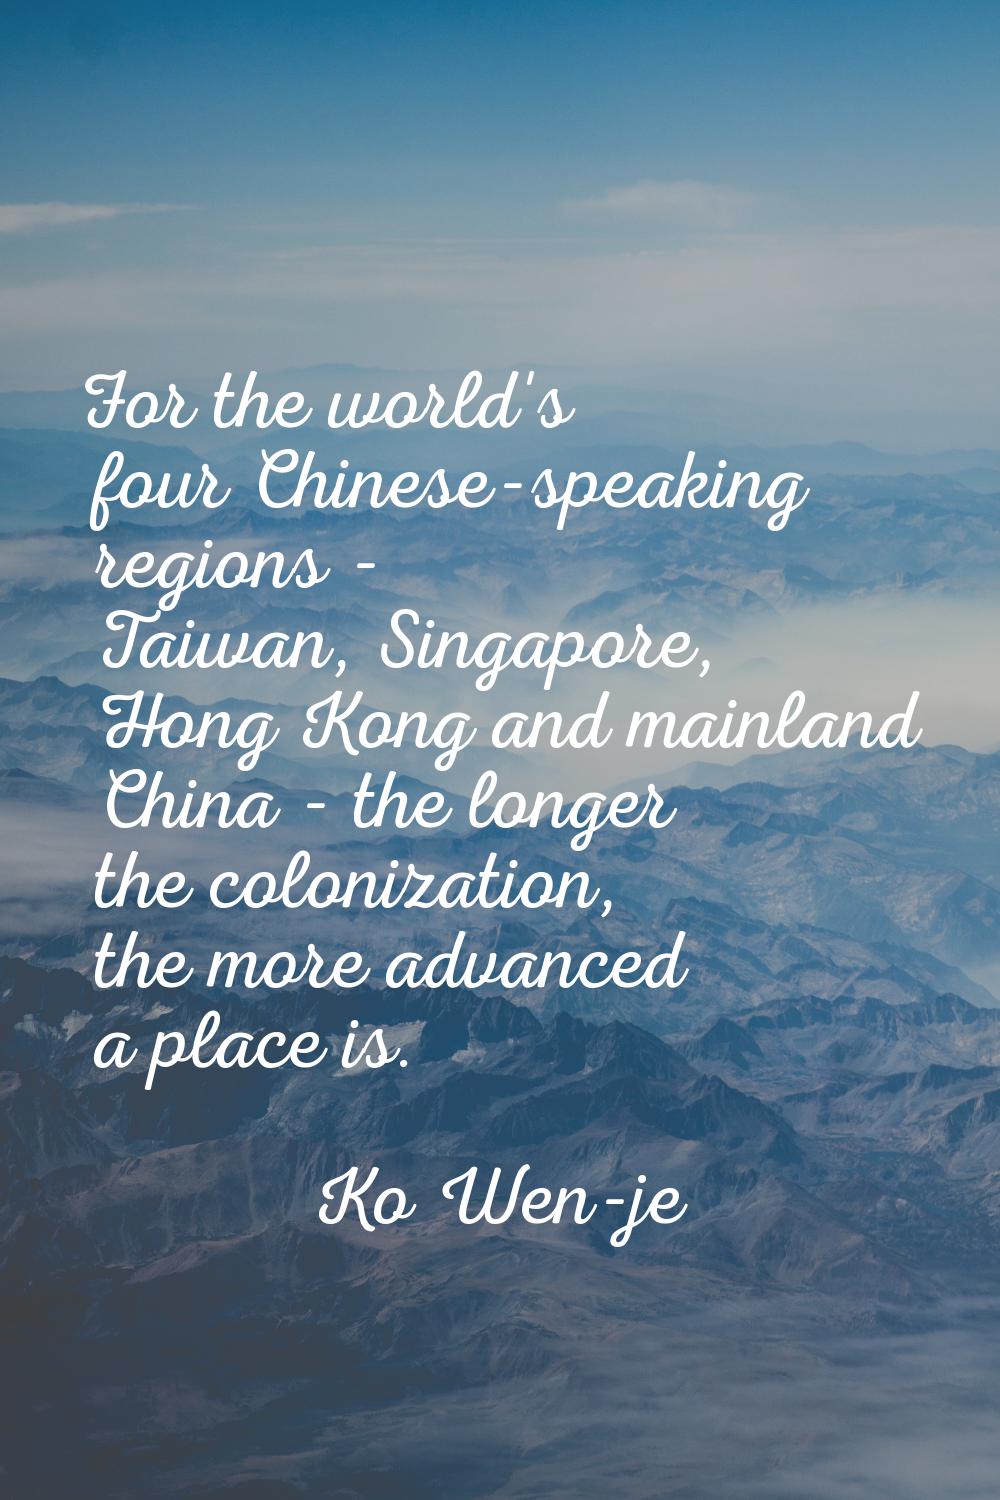 For the world's four Chinese-speaking regions - Taiwan, Singapore, Hong Kong and mainland China - t